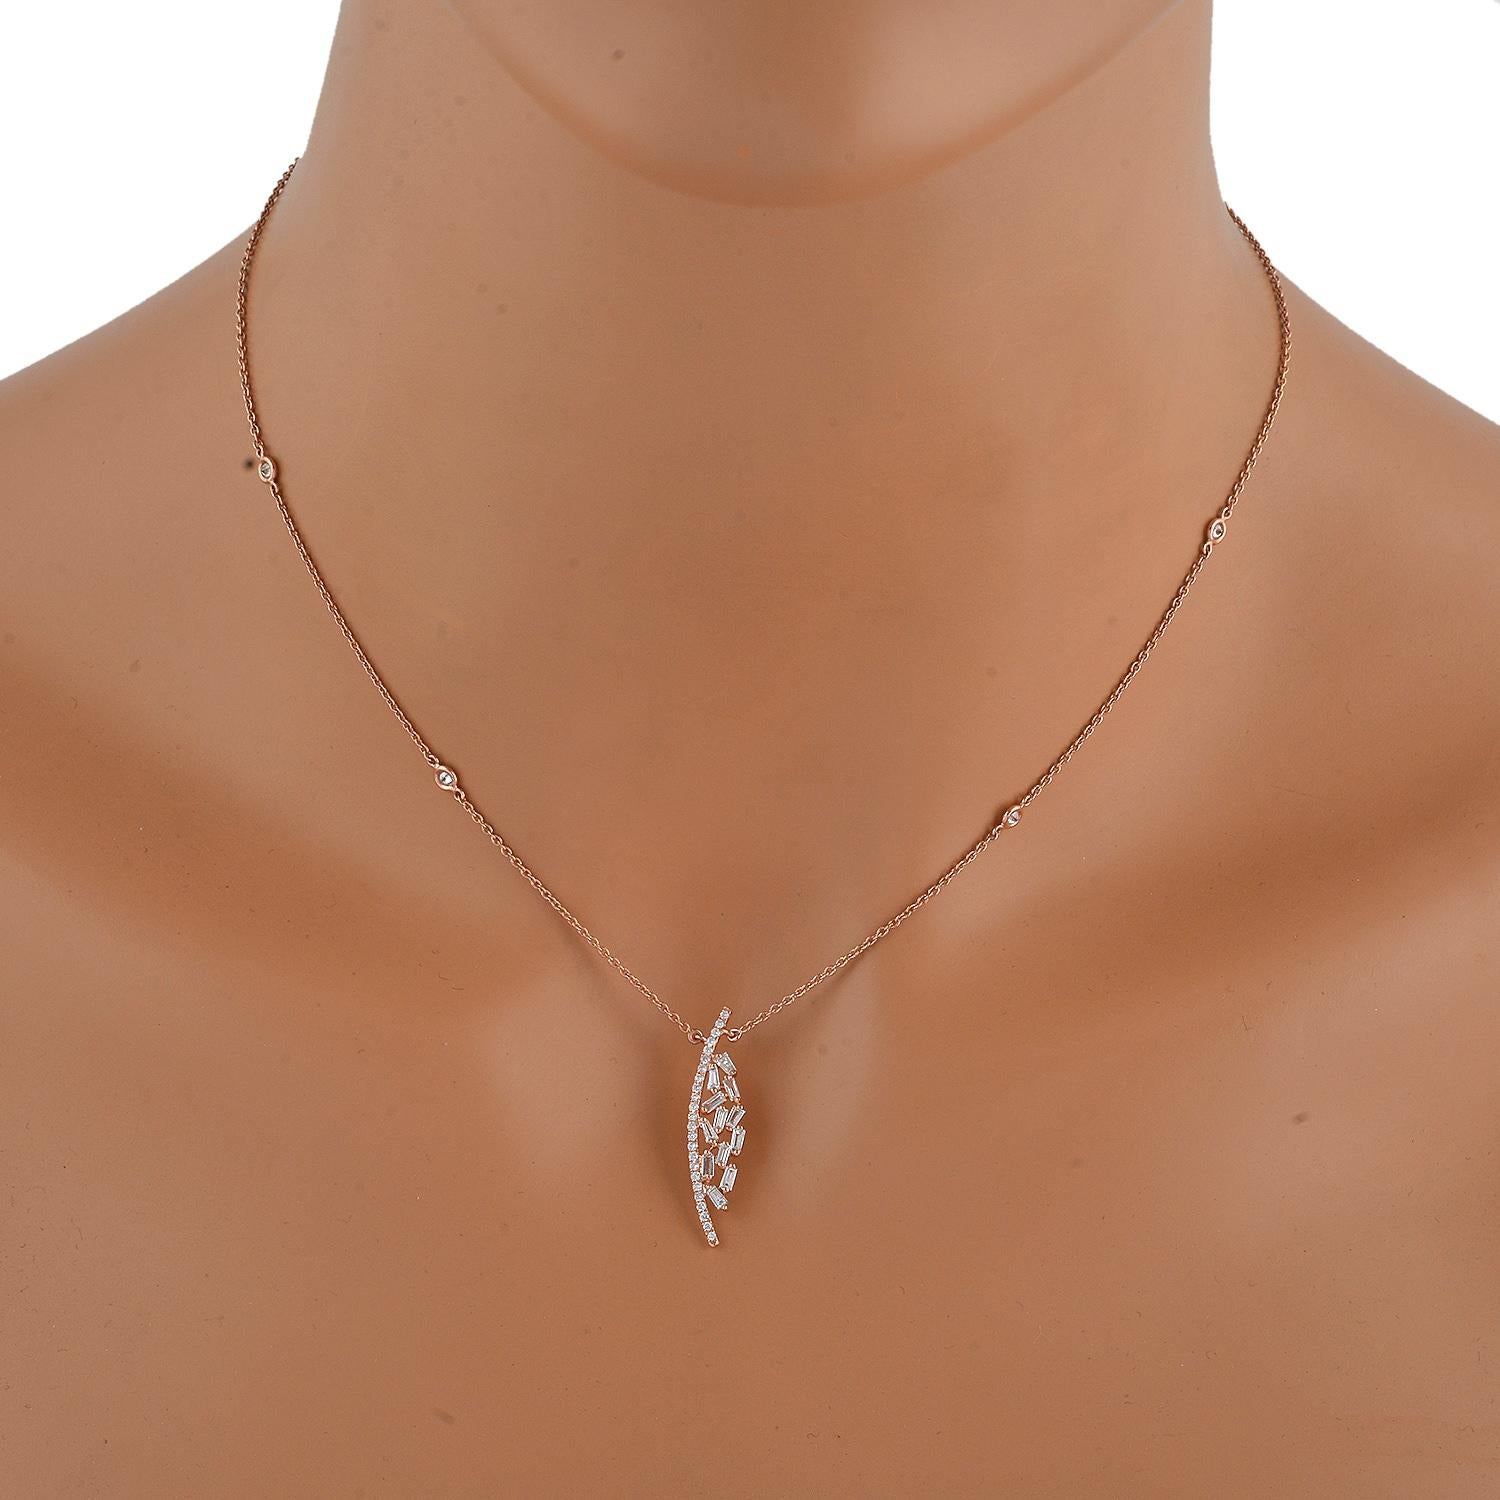 Mixed Cut Designer Choker Necklace with Baguette Diamonds Charm Made in 18k Rose Gold For Sale